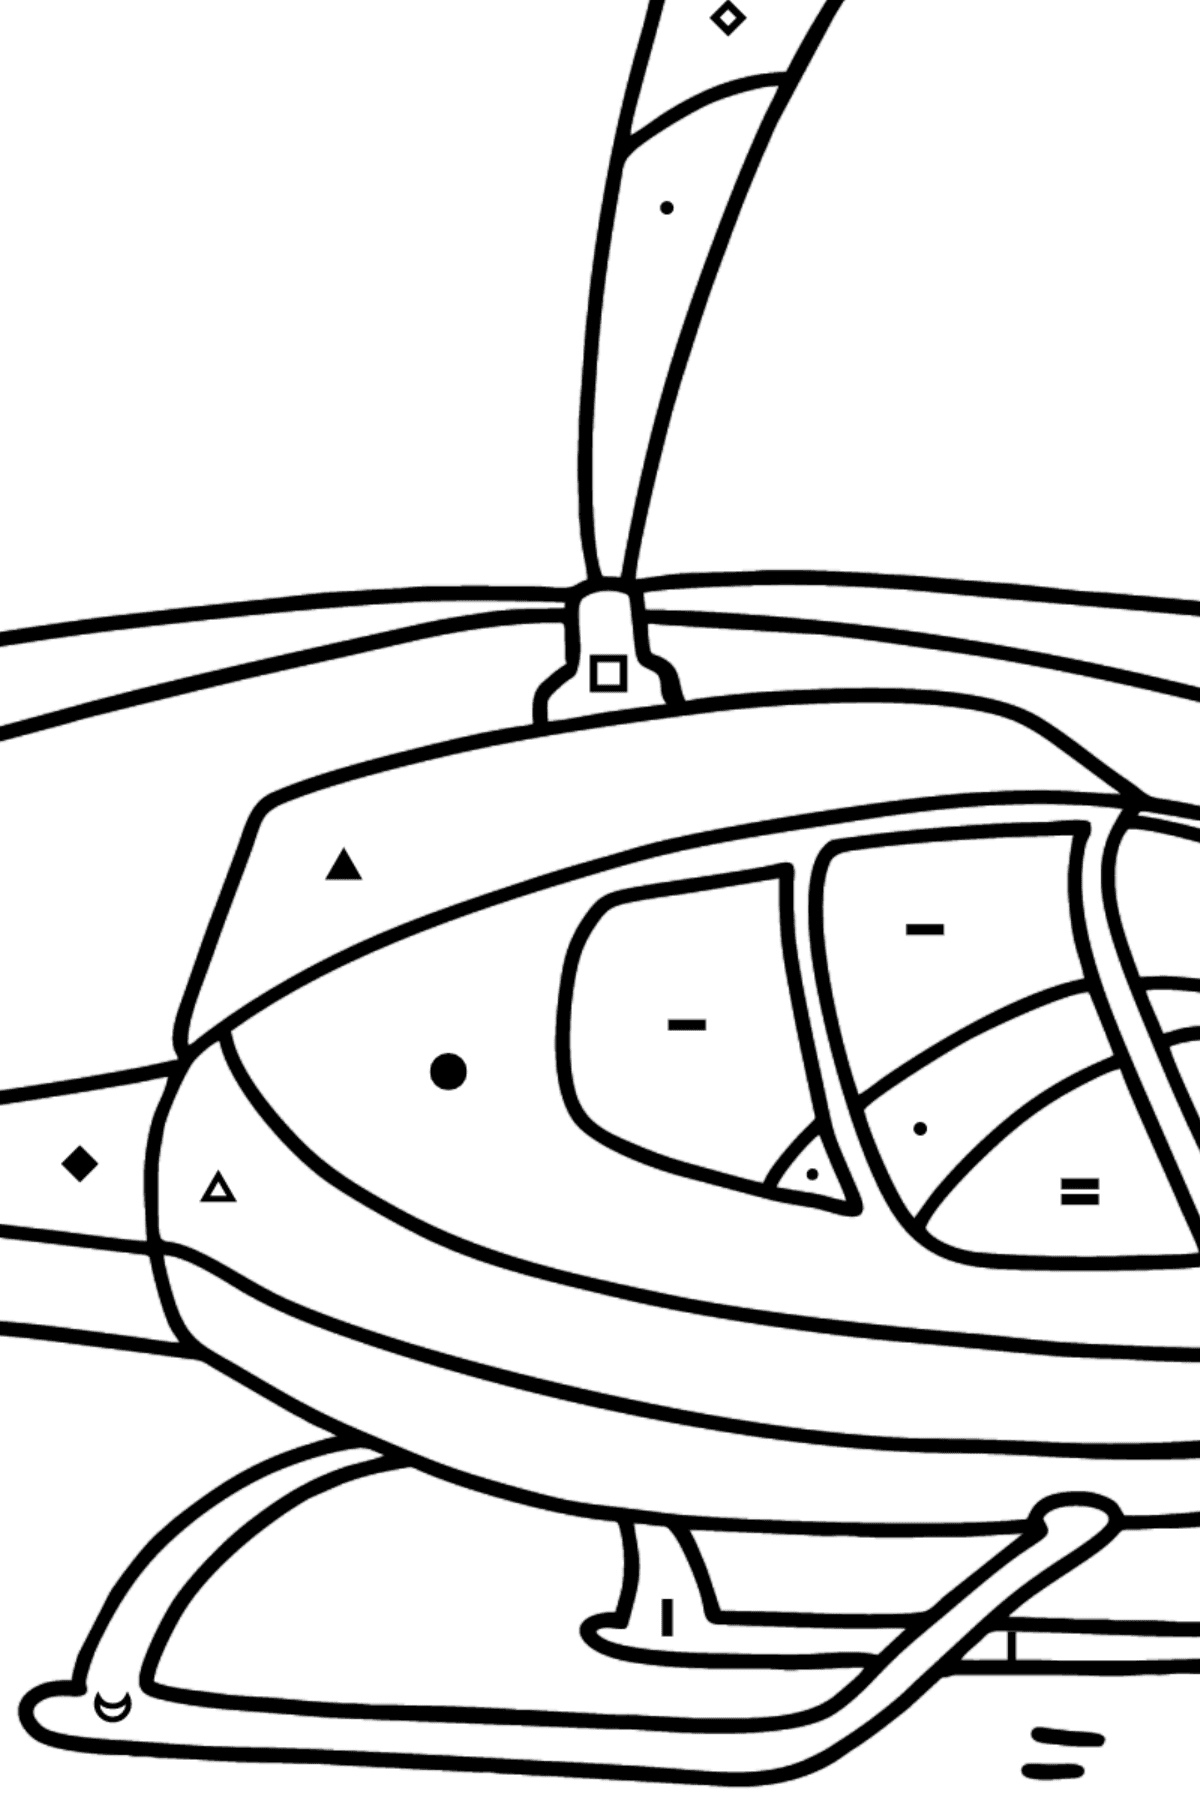 Beautiful Helicopter coloring page - Coloring by Symbols for Kids